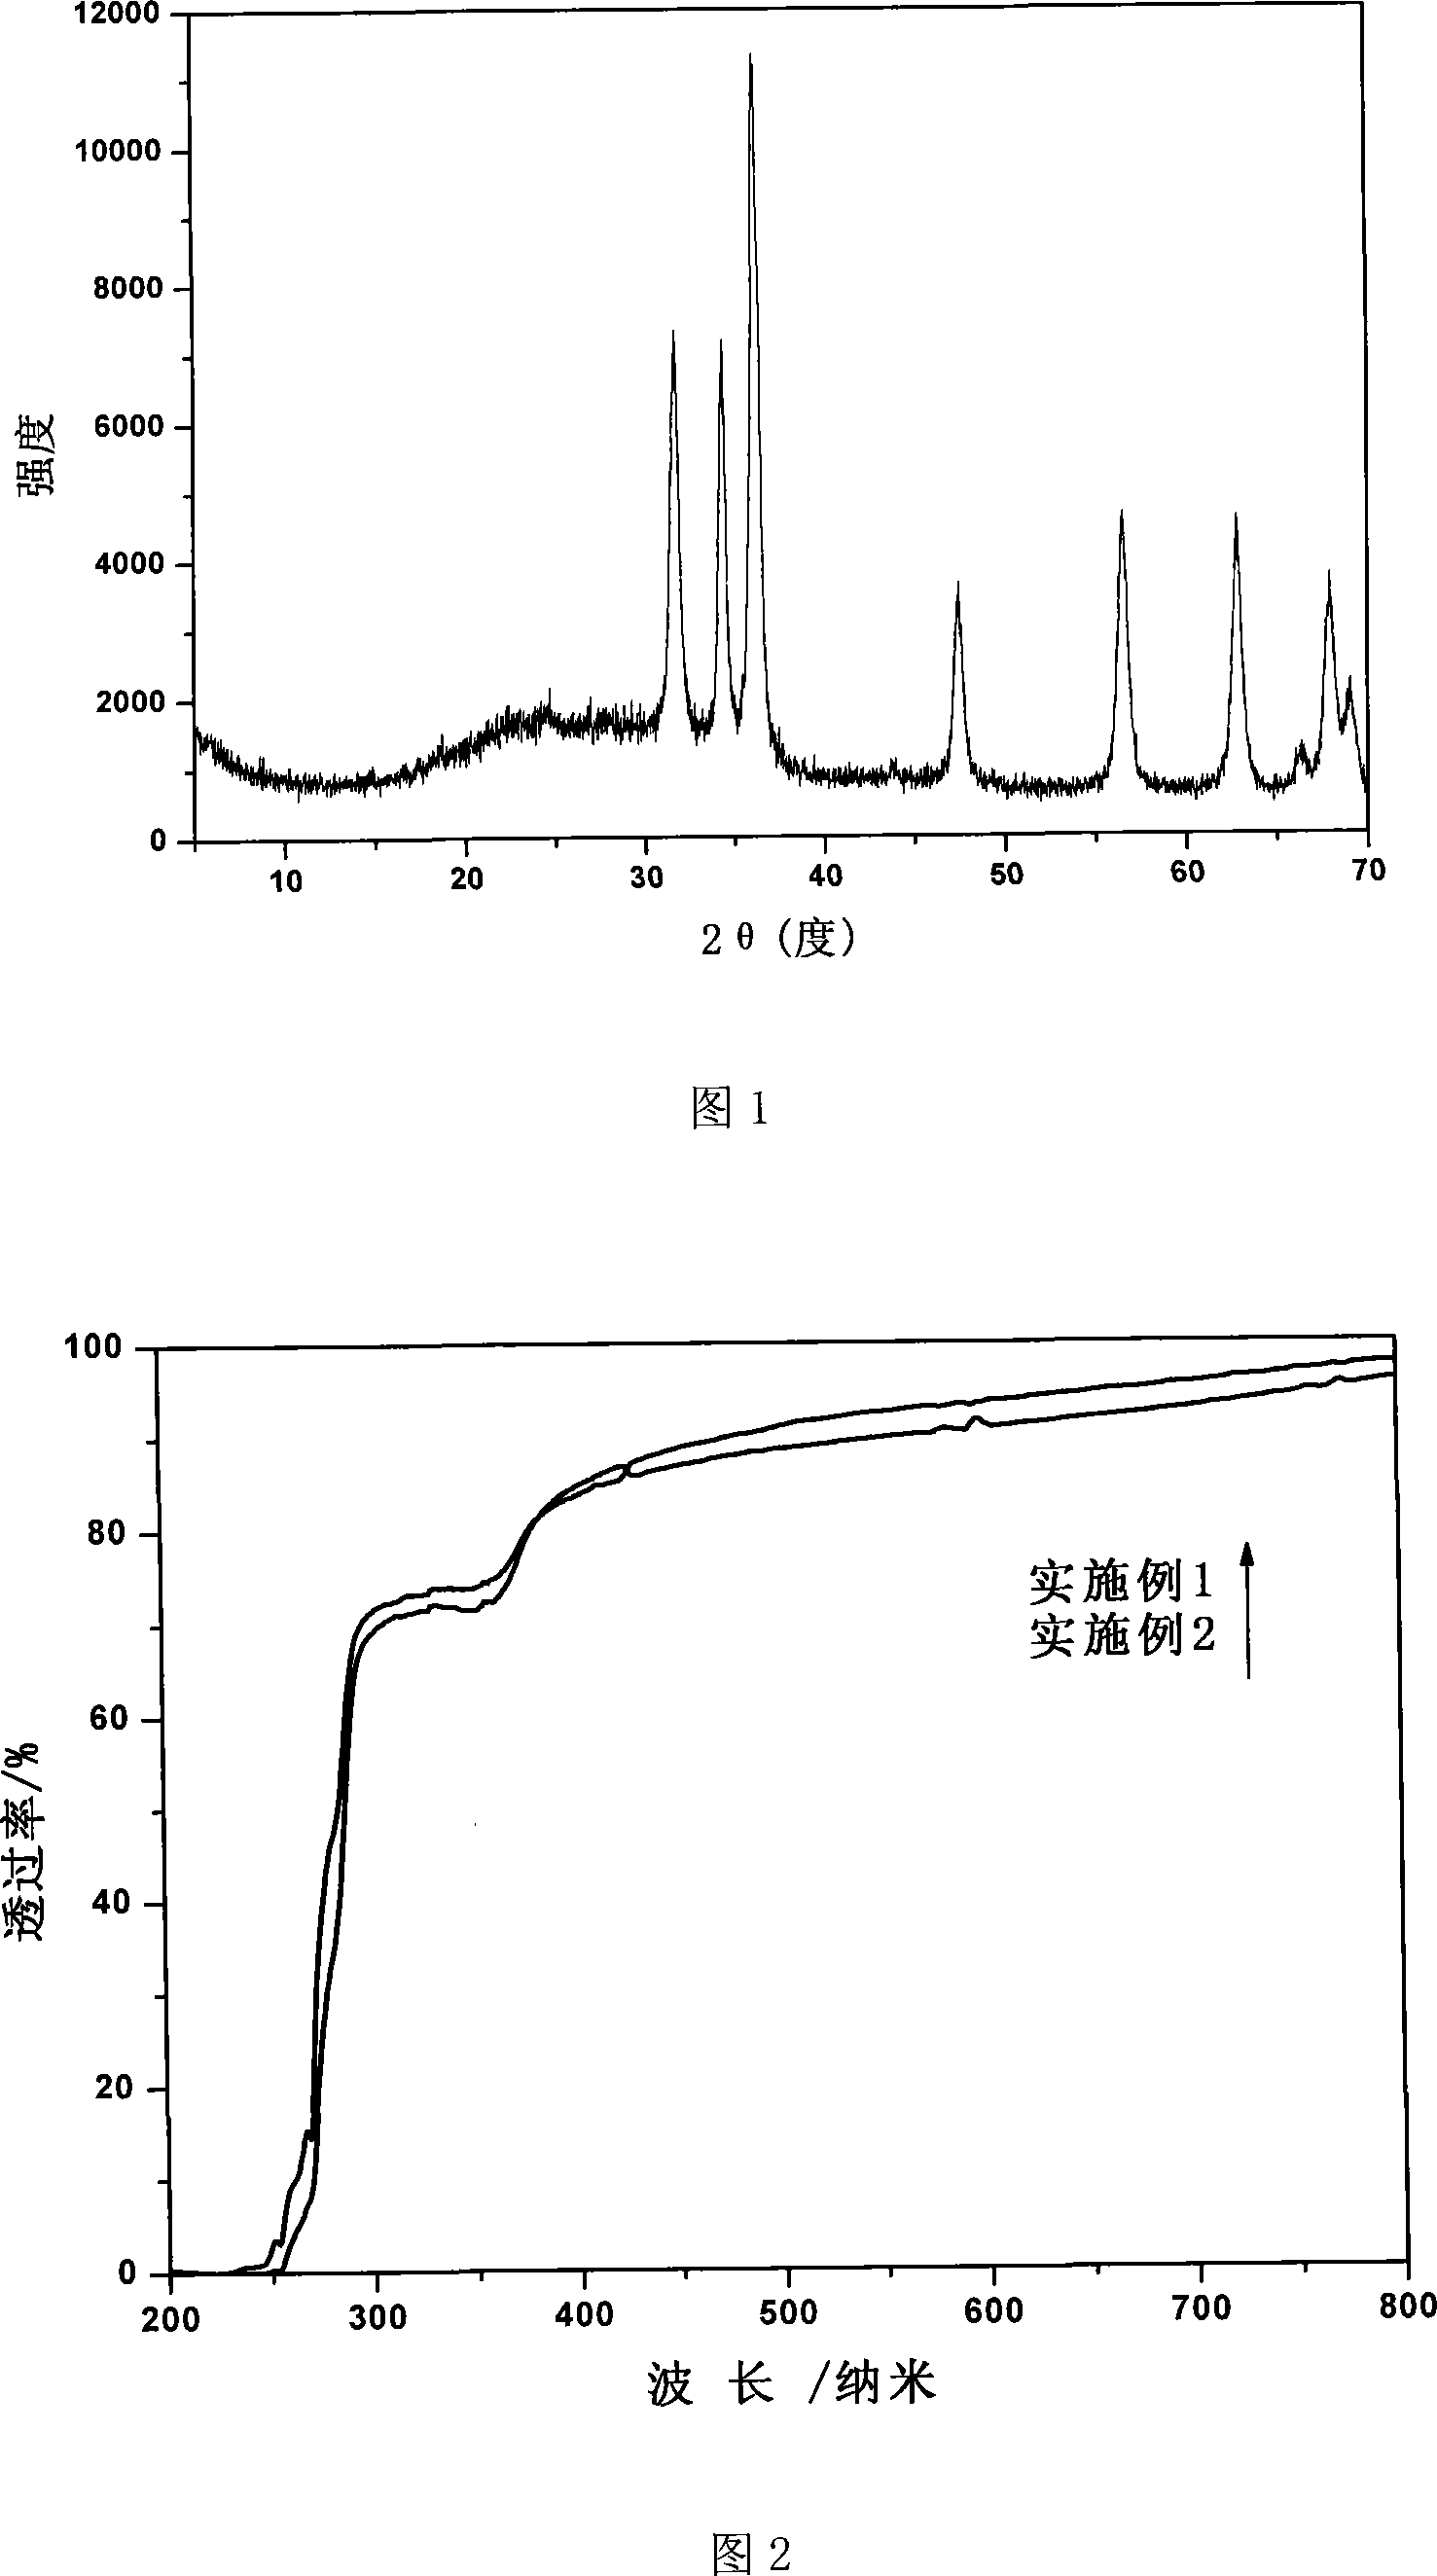 Anti-ultraviolet organic-inorganic nano composite transparent coating and method for producing the same